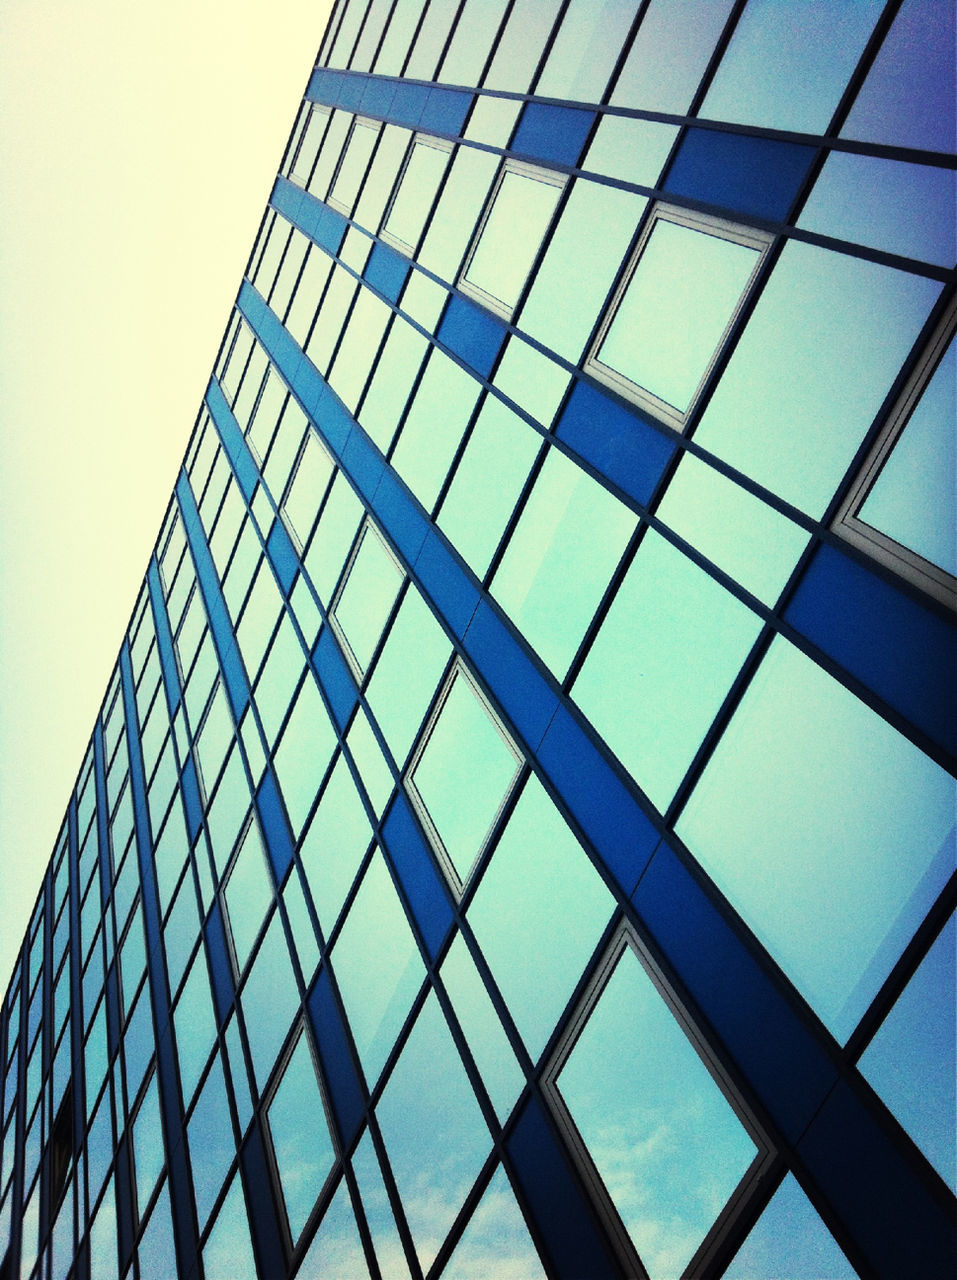 architecture, low angle view, built structure, modern, glass - material, building exterior, office building, pattern, reflection, window, building, city, clear sky, glass, full frame, skyscraper, tall - high, backgrounds, geometric shape, sky